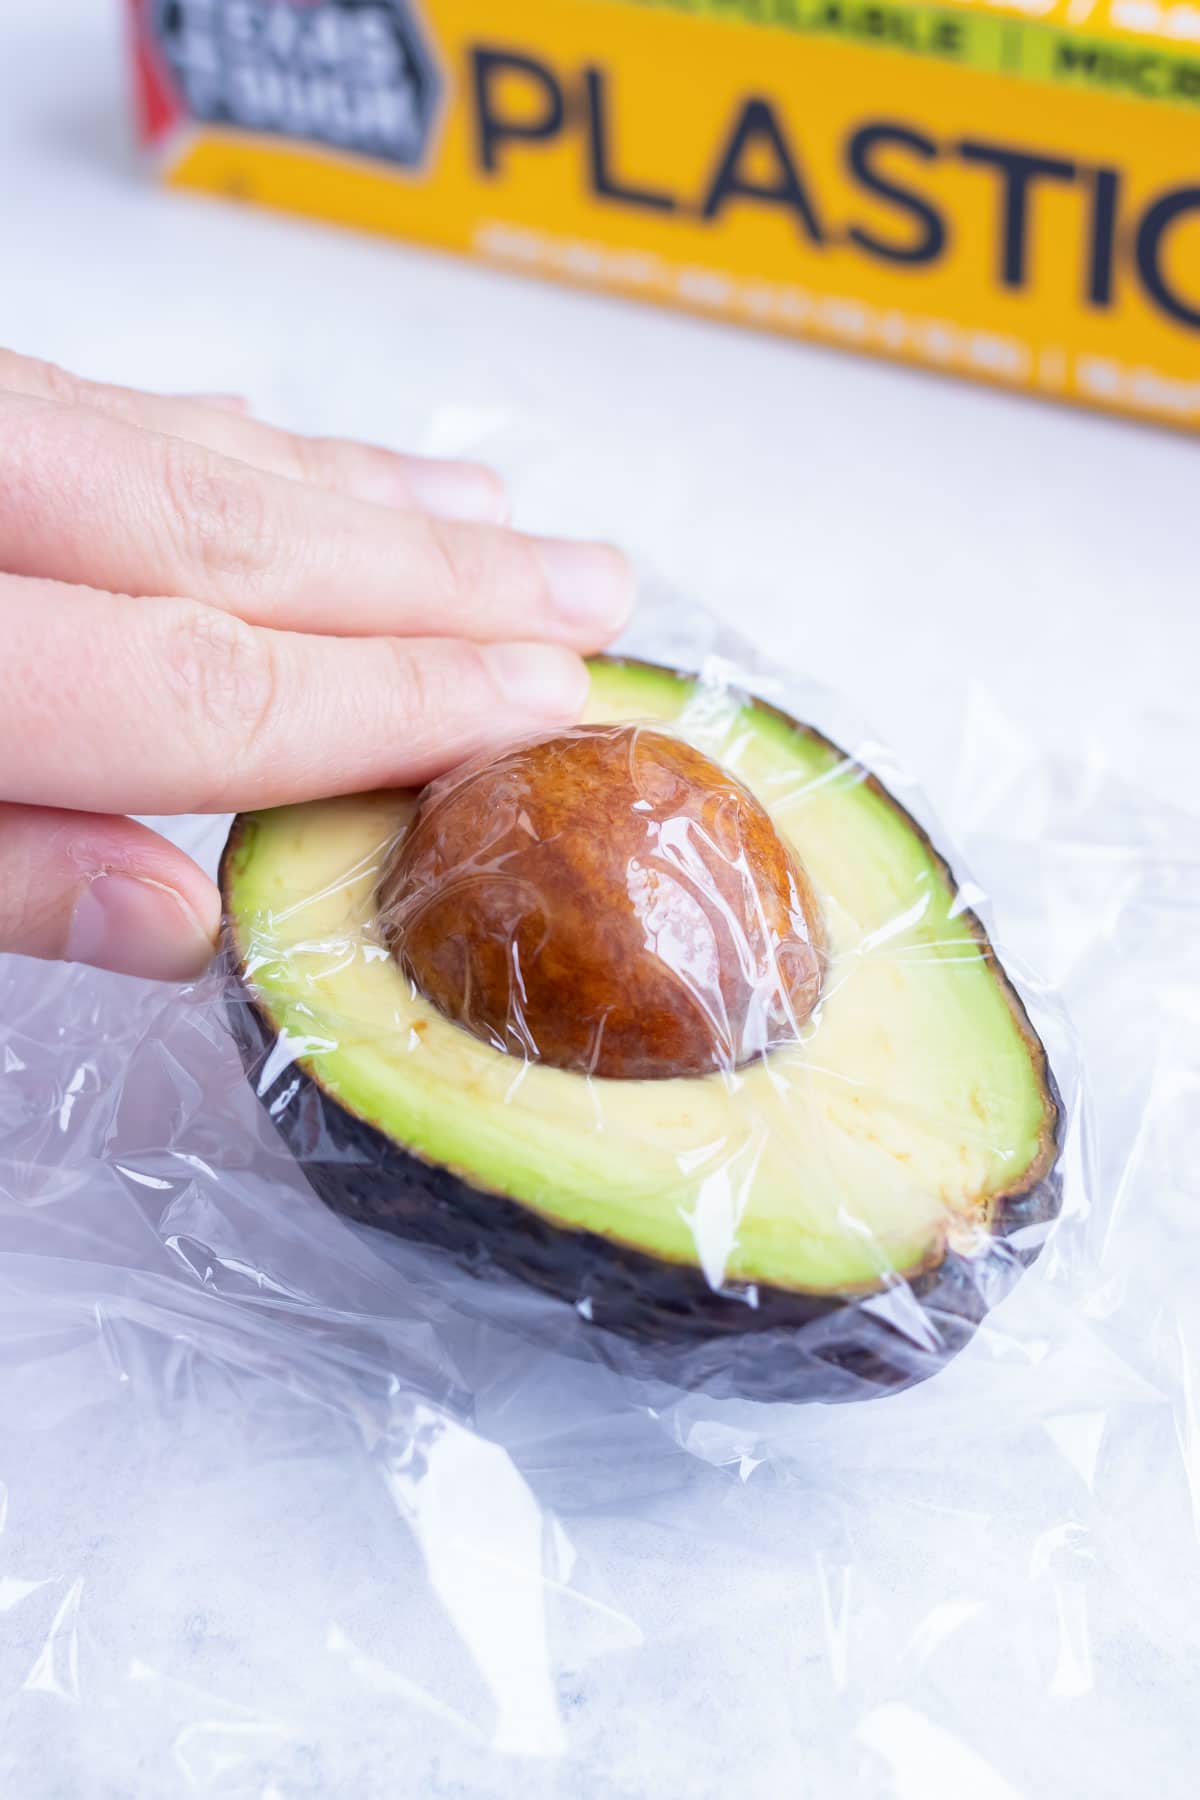 A sliced open avocado with the pit inside and a plastic ripe placed over the exposed avocado.